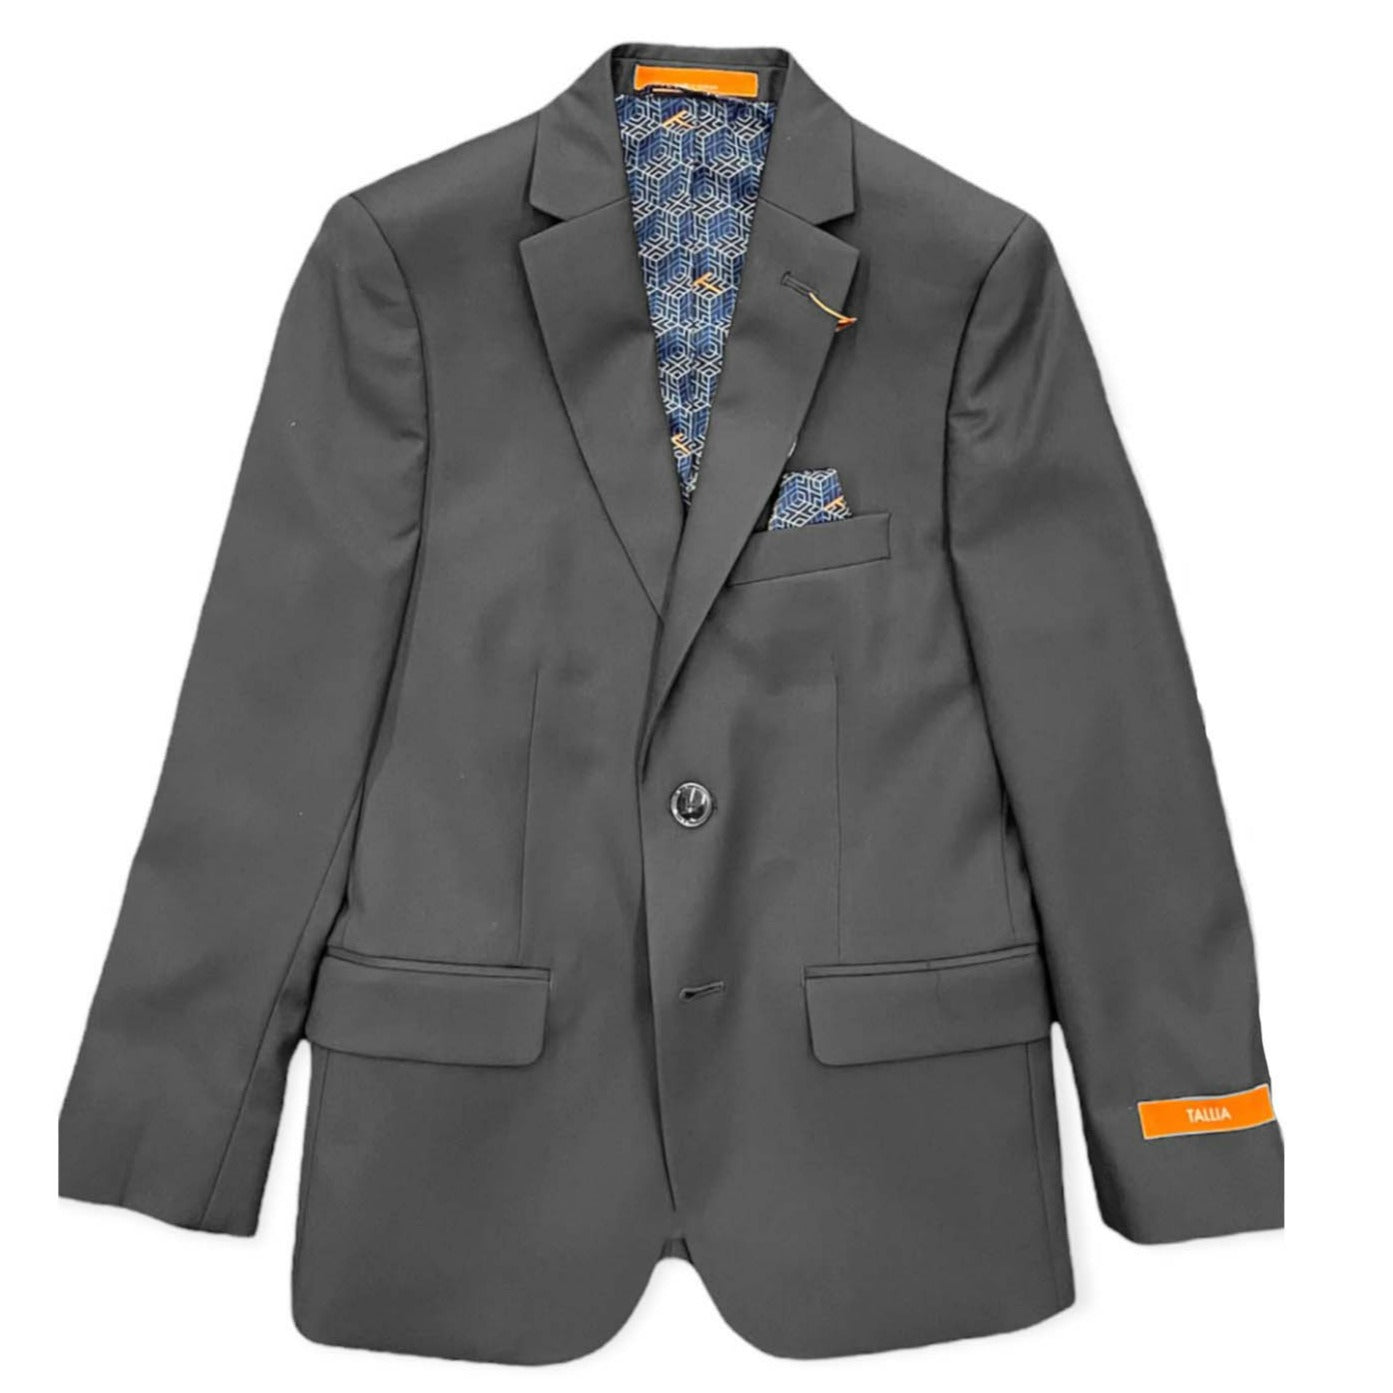 Boys Skinny Charcoal Suit Separate Jacket RY